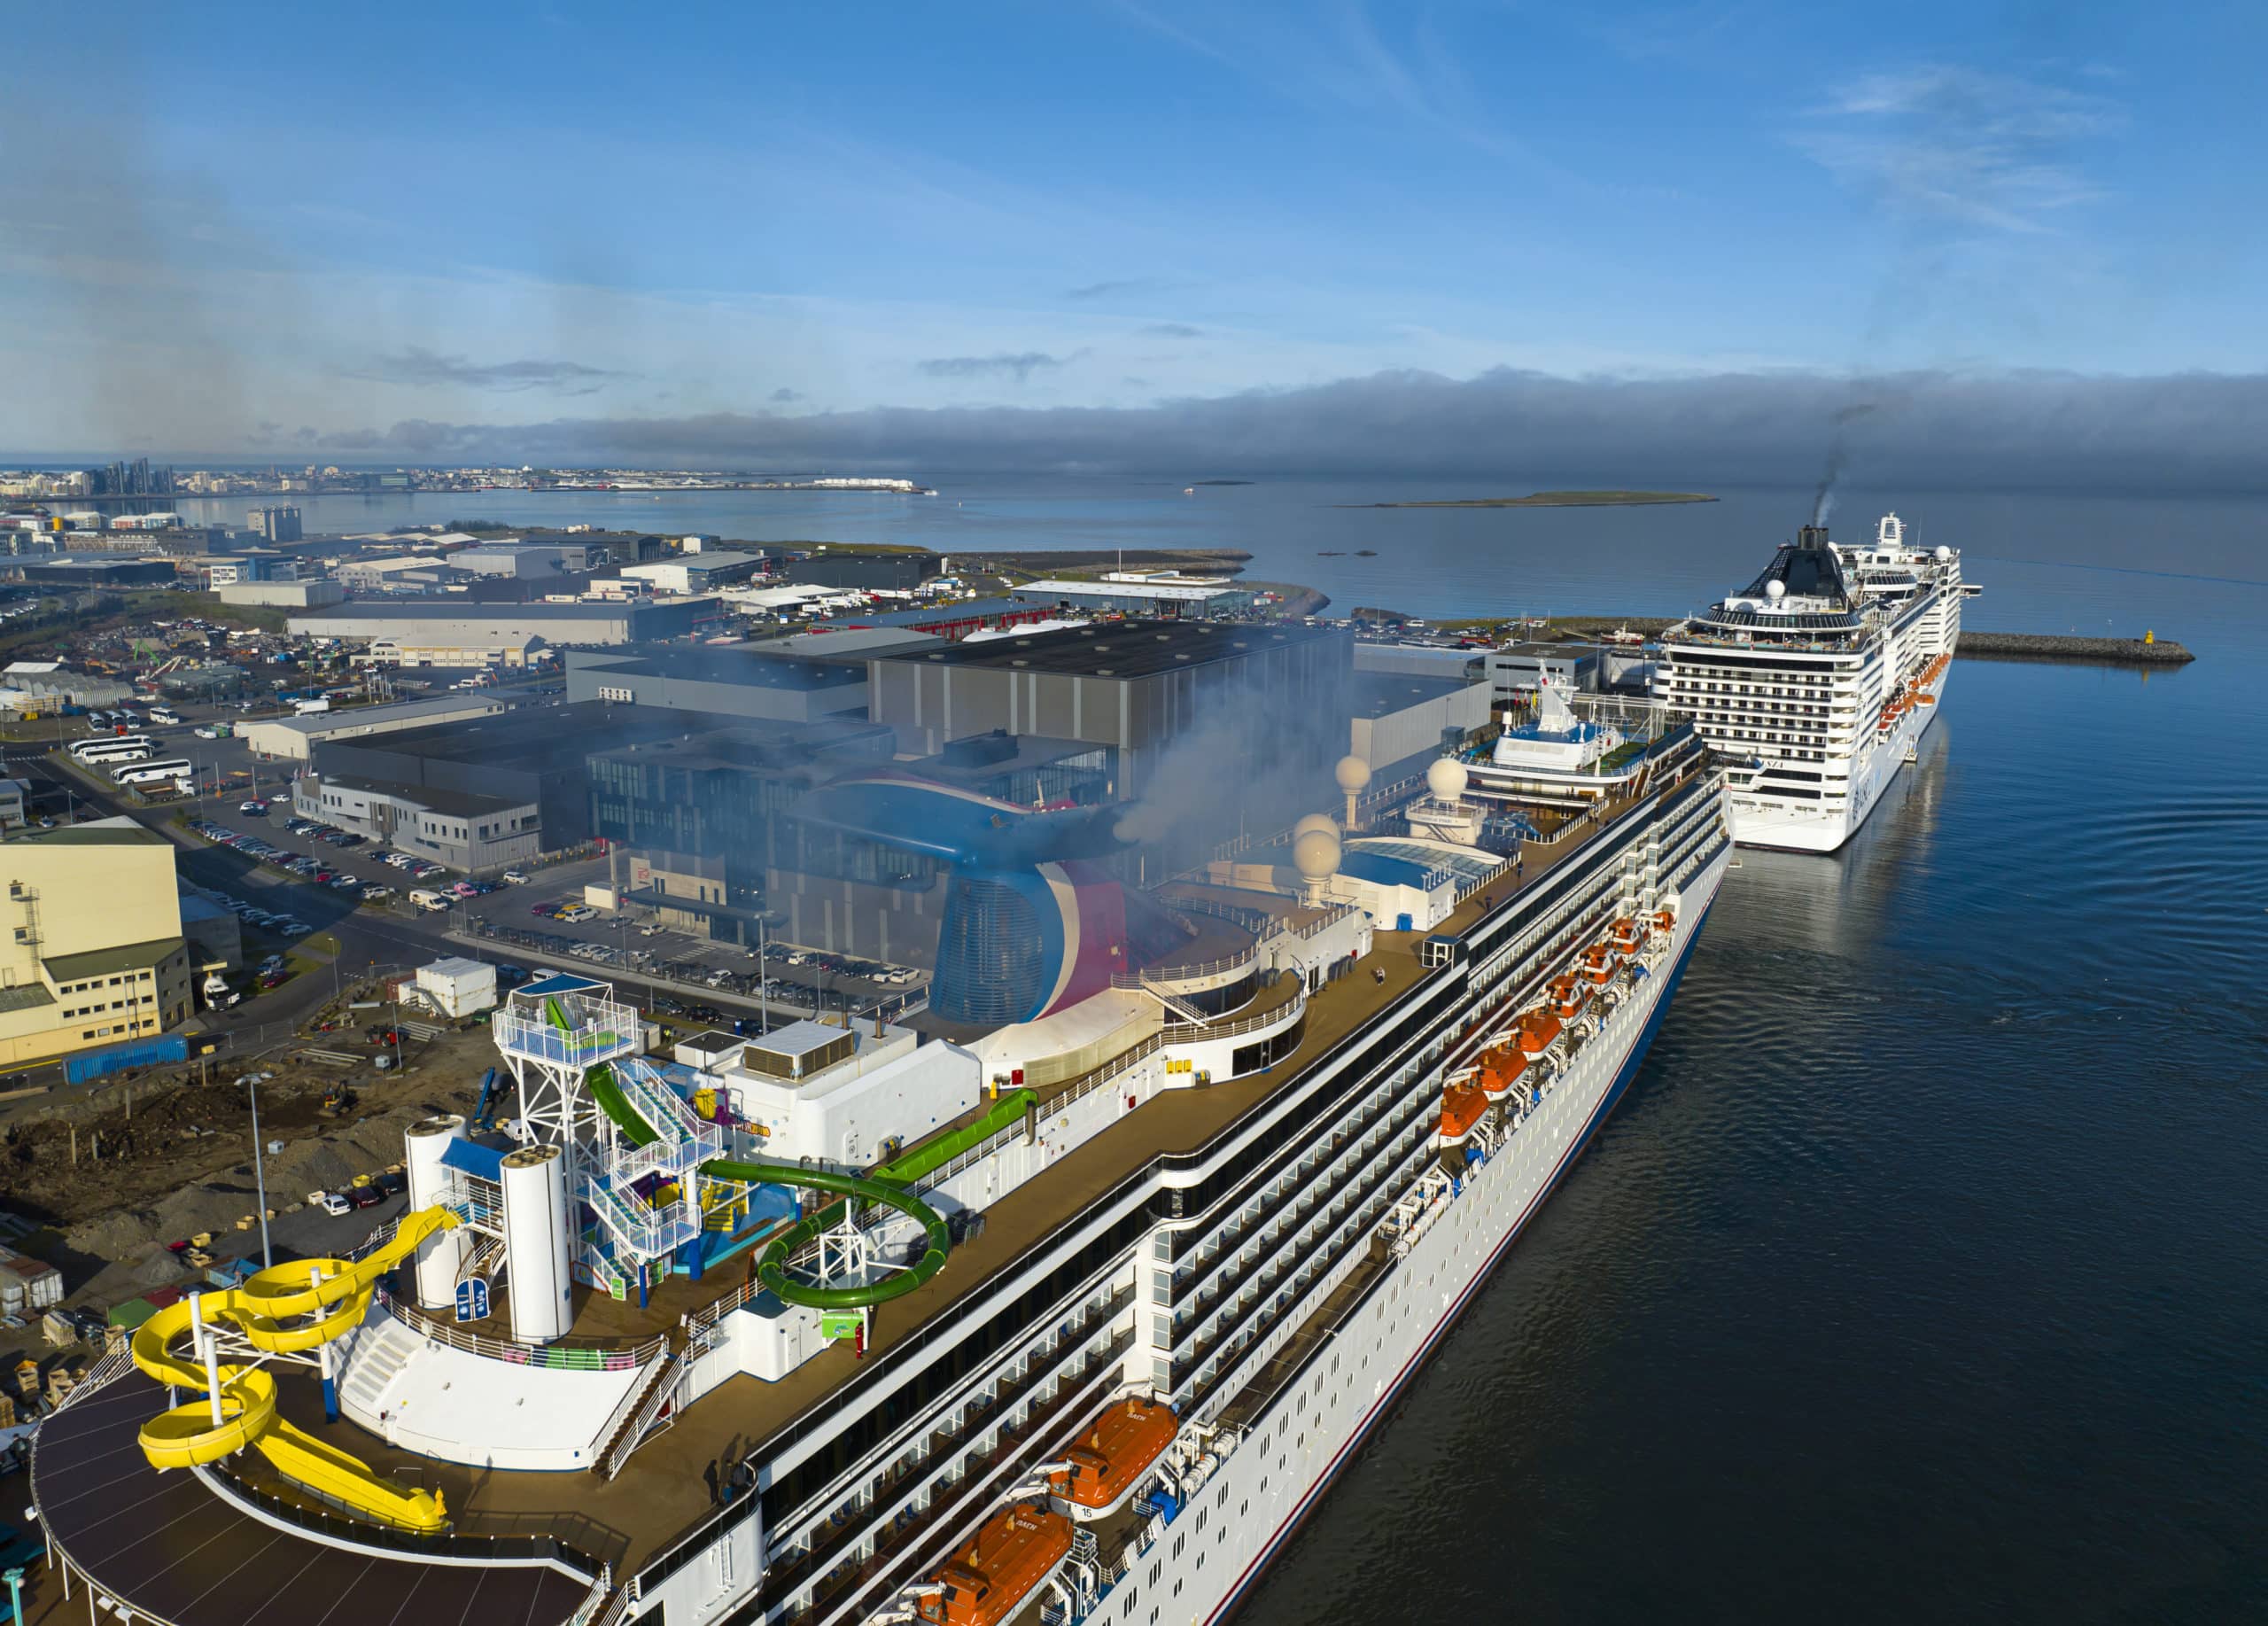 In Focus: Cruise Ships